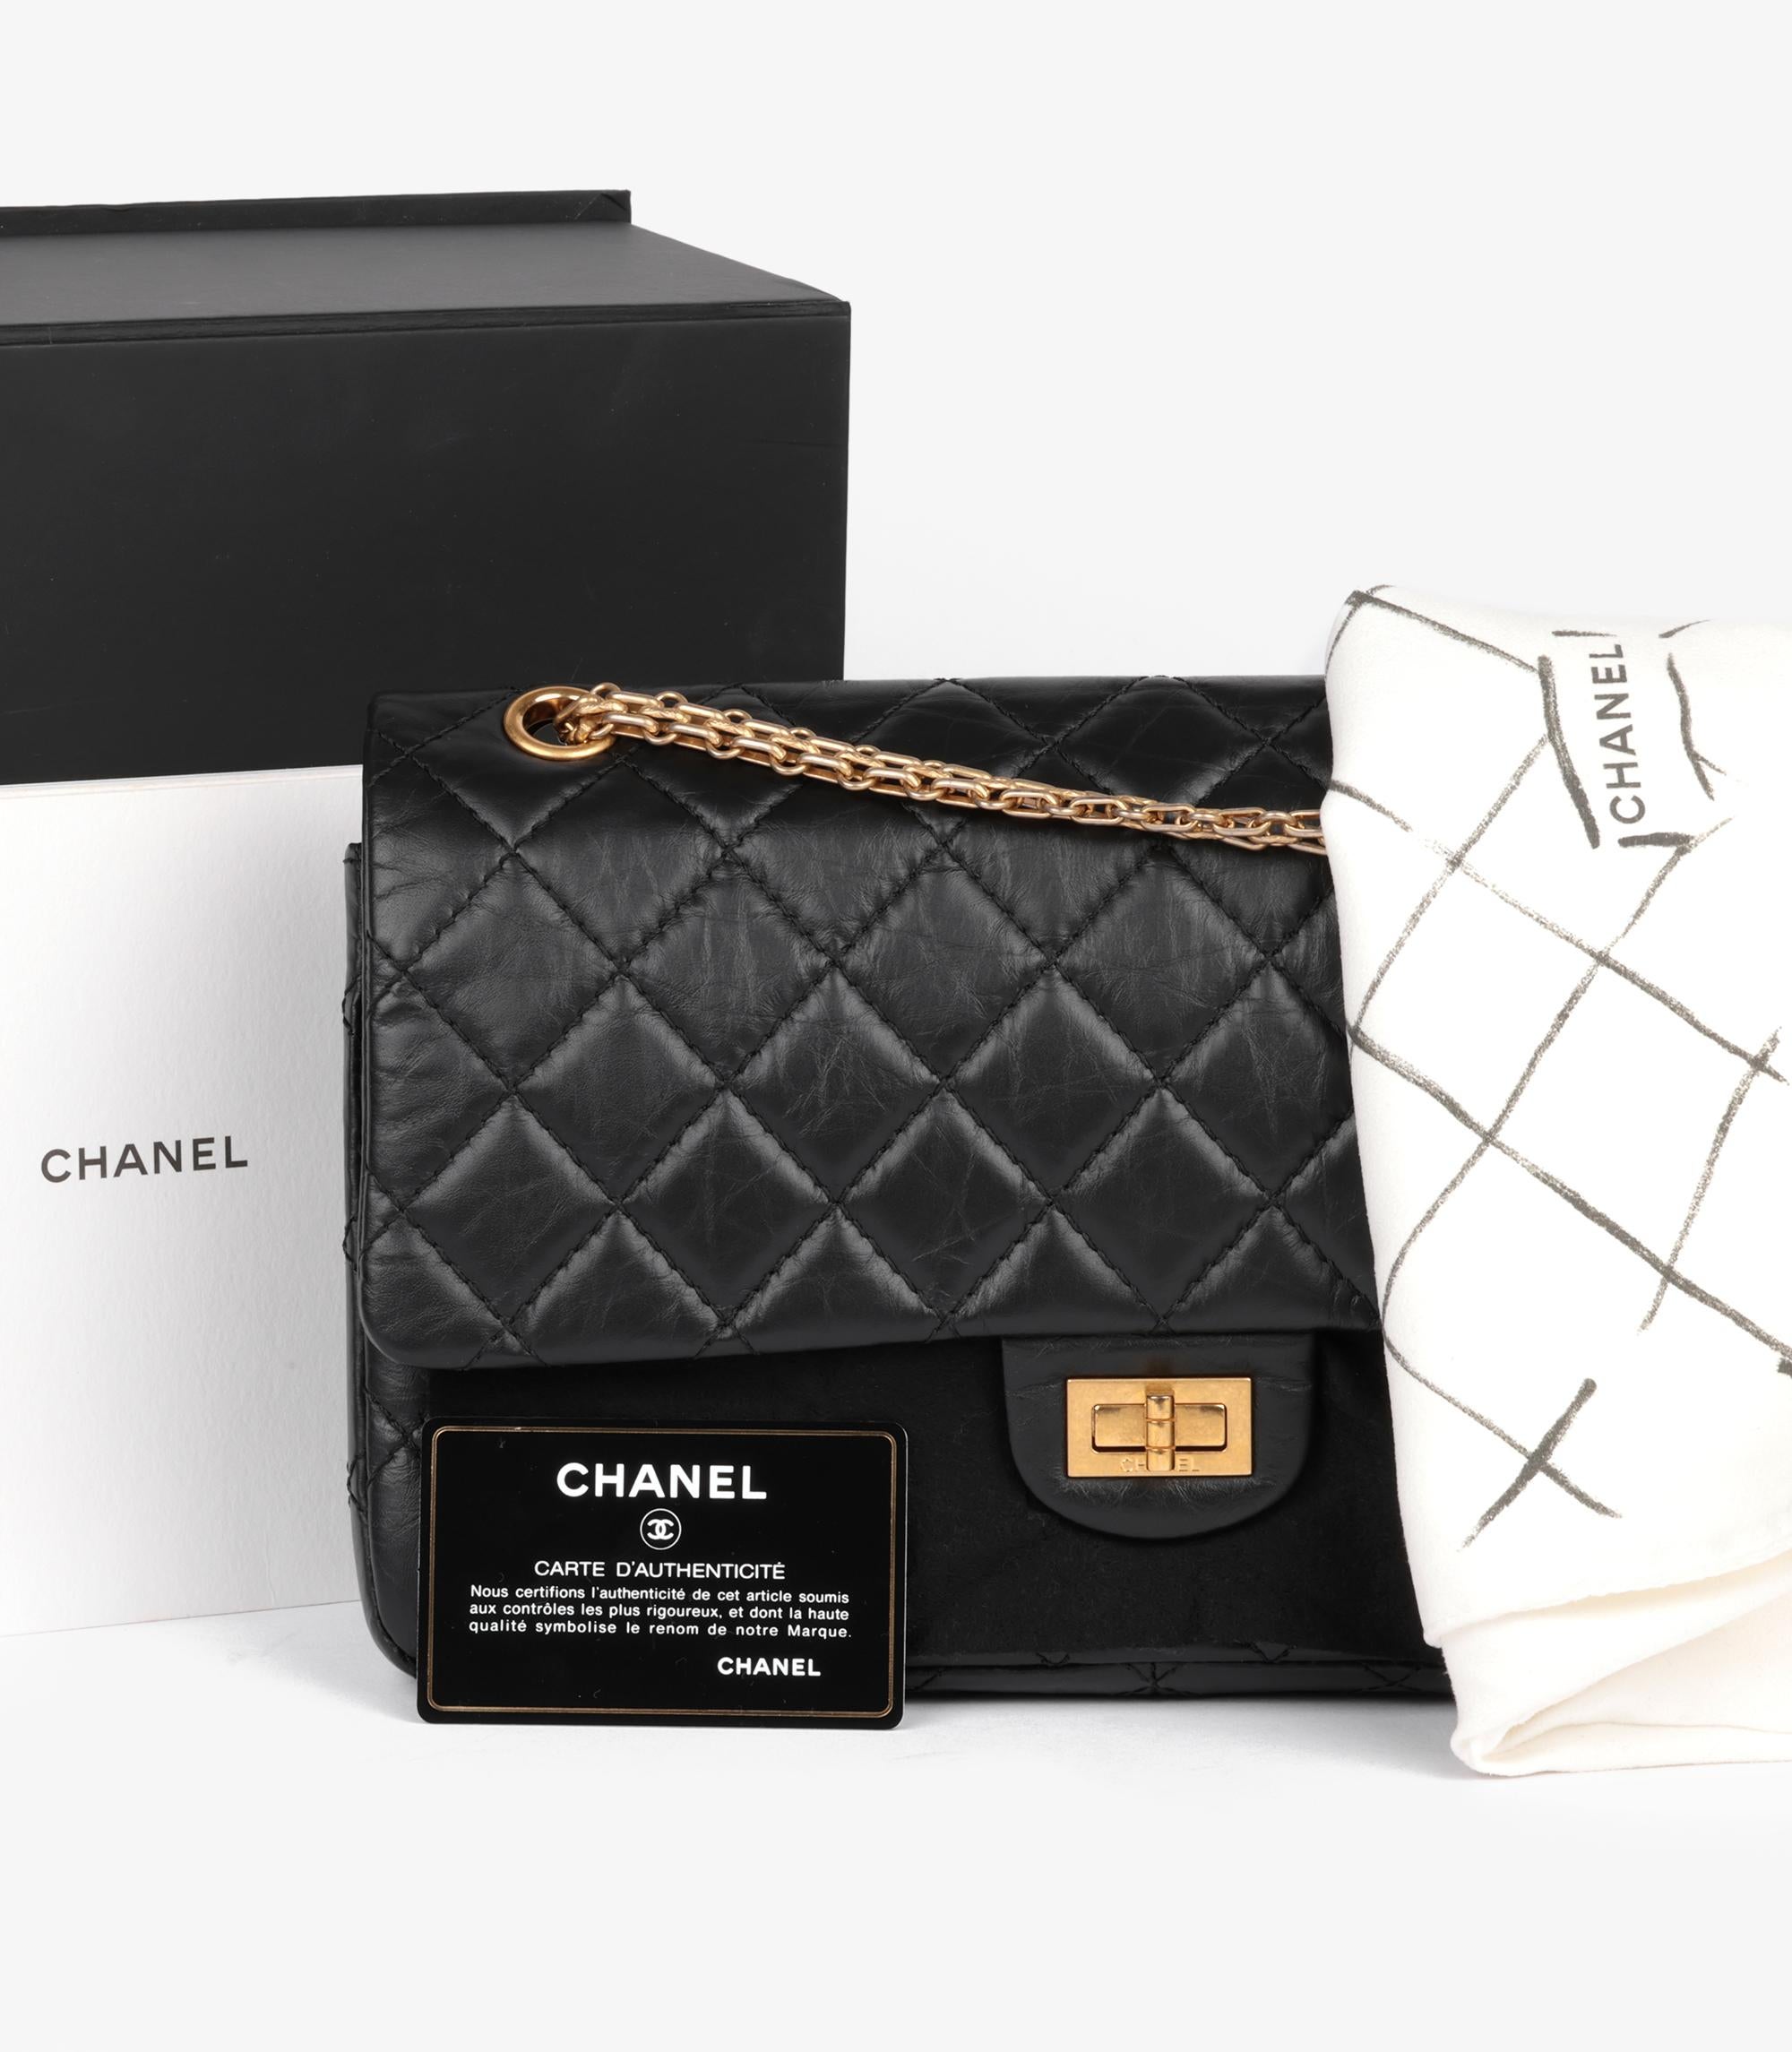 Chanel Black Quilted Crinkled Calfskin Leather 226 2.55 Reissue Double Flap Bag For Sale 9